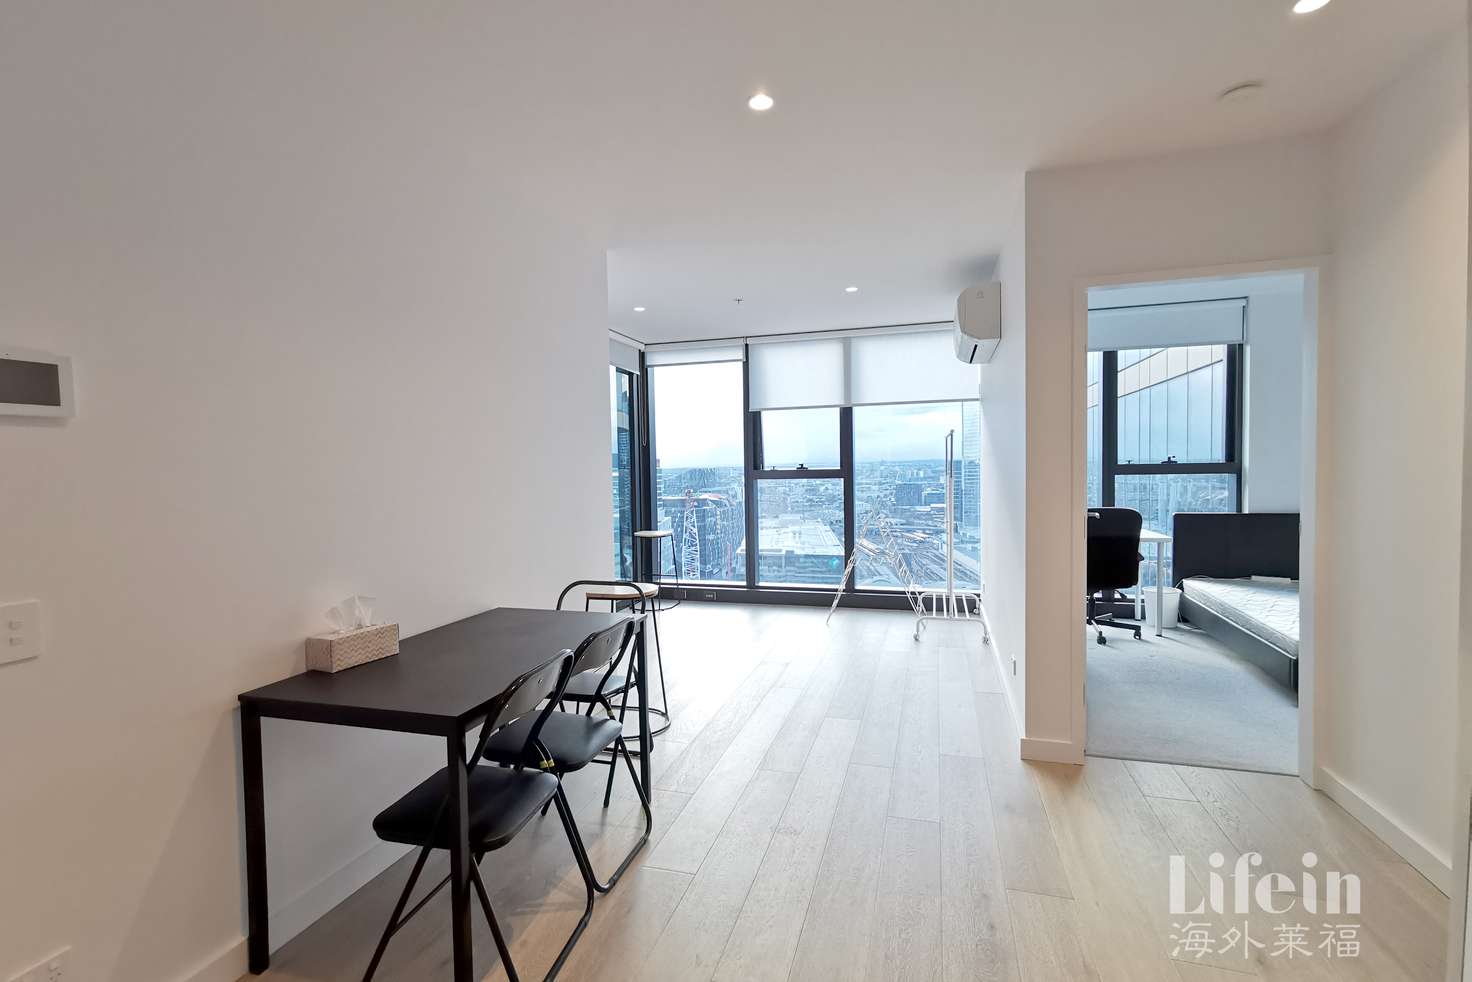 Main view of Homely apartment listing, 2818/628 Flinders Street, Docklands VIC 3008